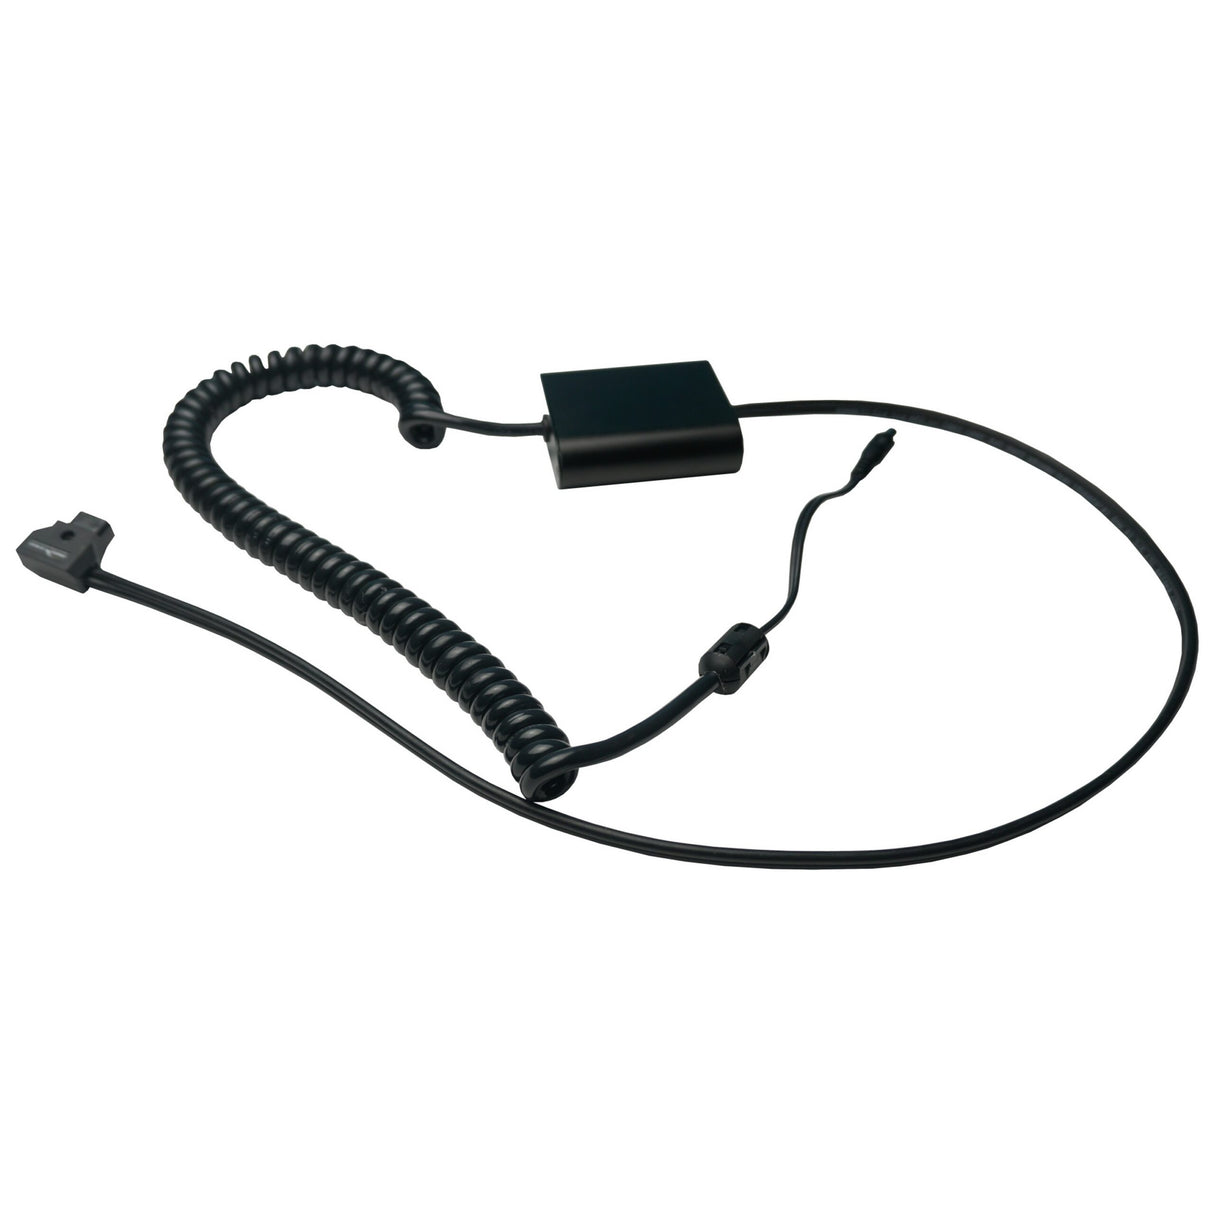 IndiPRO CDTKOS2 Coiled D-Tap Regulation Cable for Kandao Obsidian R/S, 6 and 8 Foot Cords